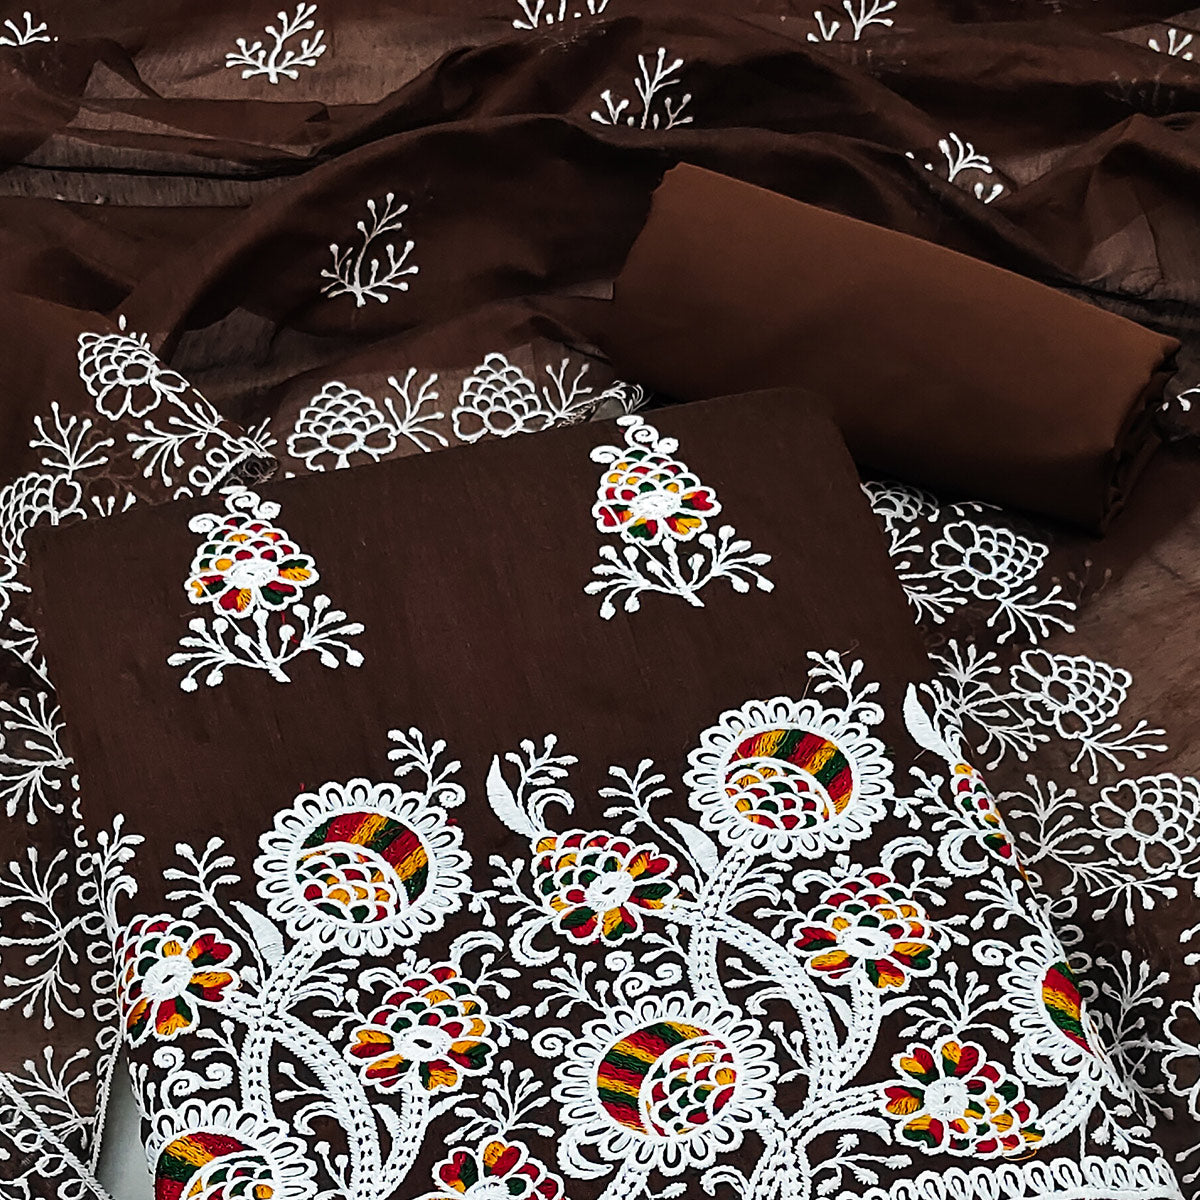 Brown Floral Embroidered Chanderi Cotton Dress Material